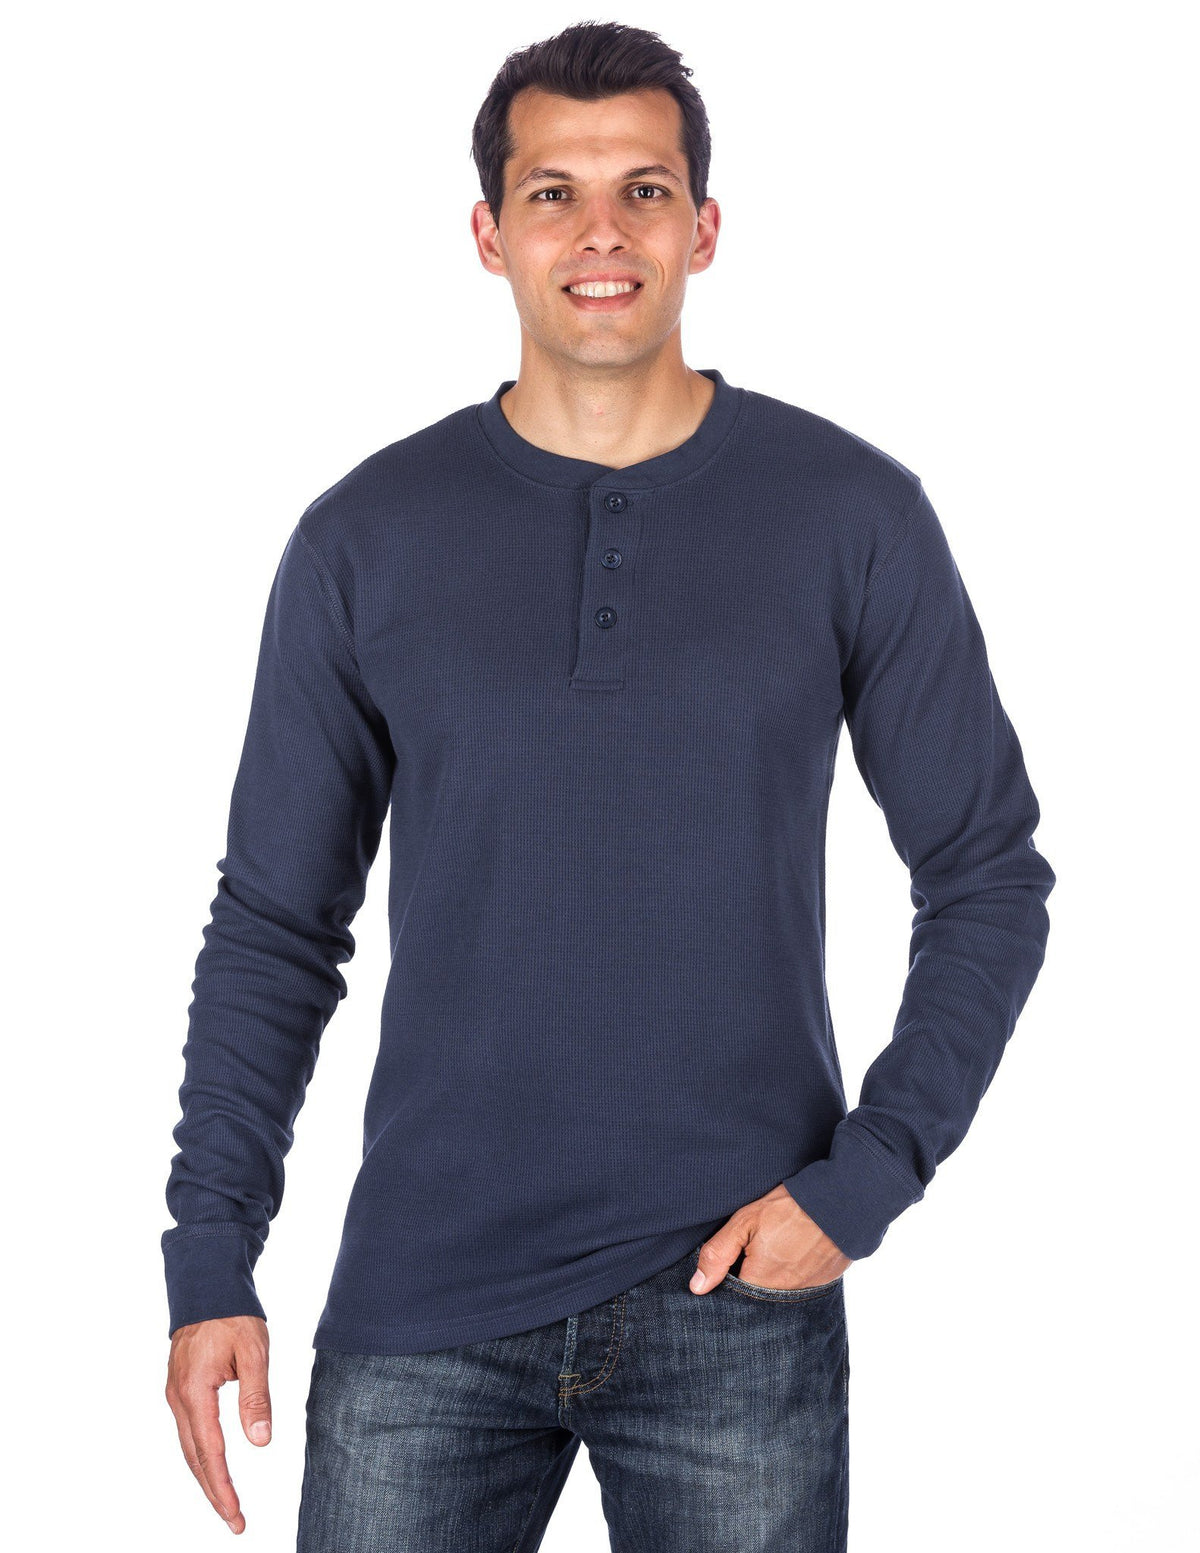 Men's Solid Thermal Henley Long Sleeve T-shirts - Dark Blue